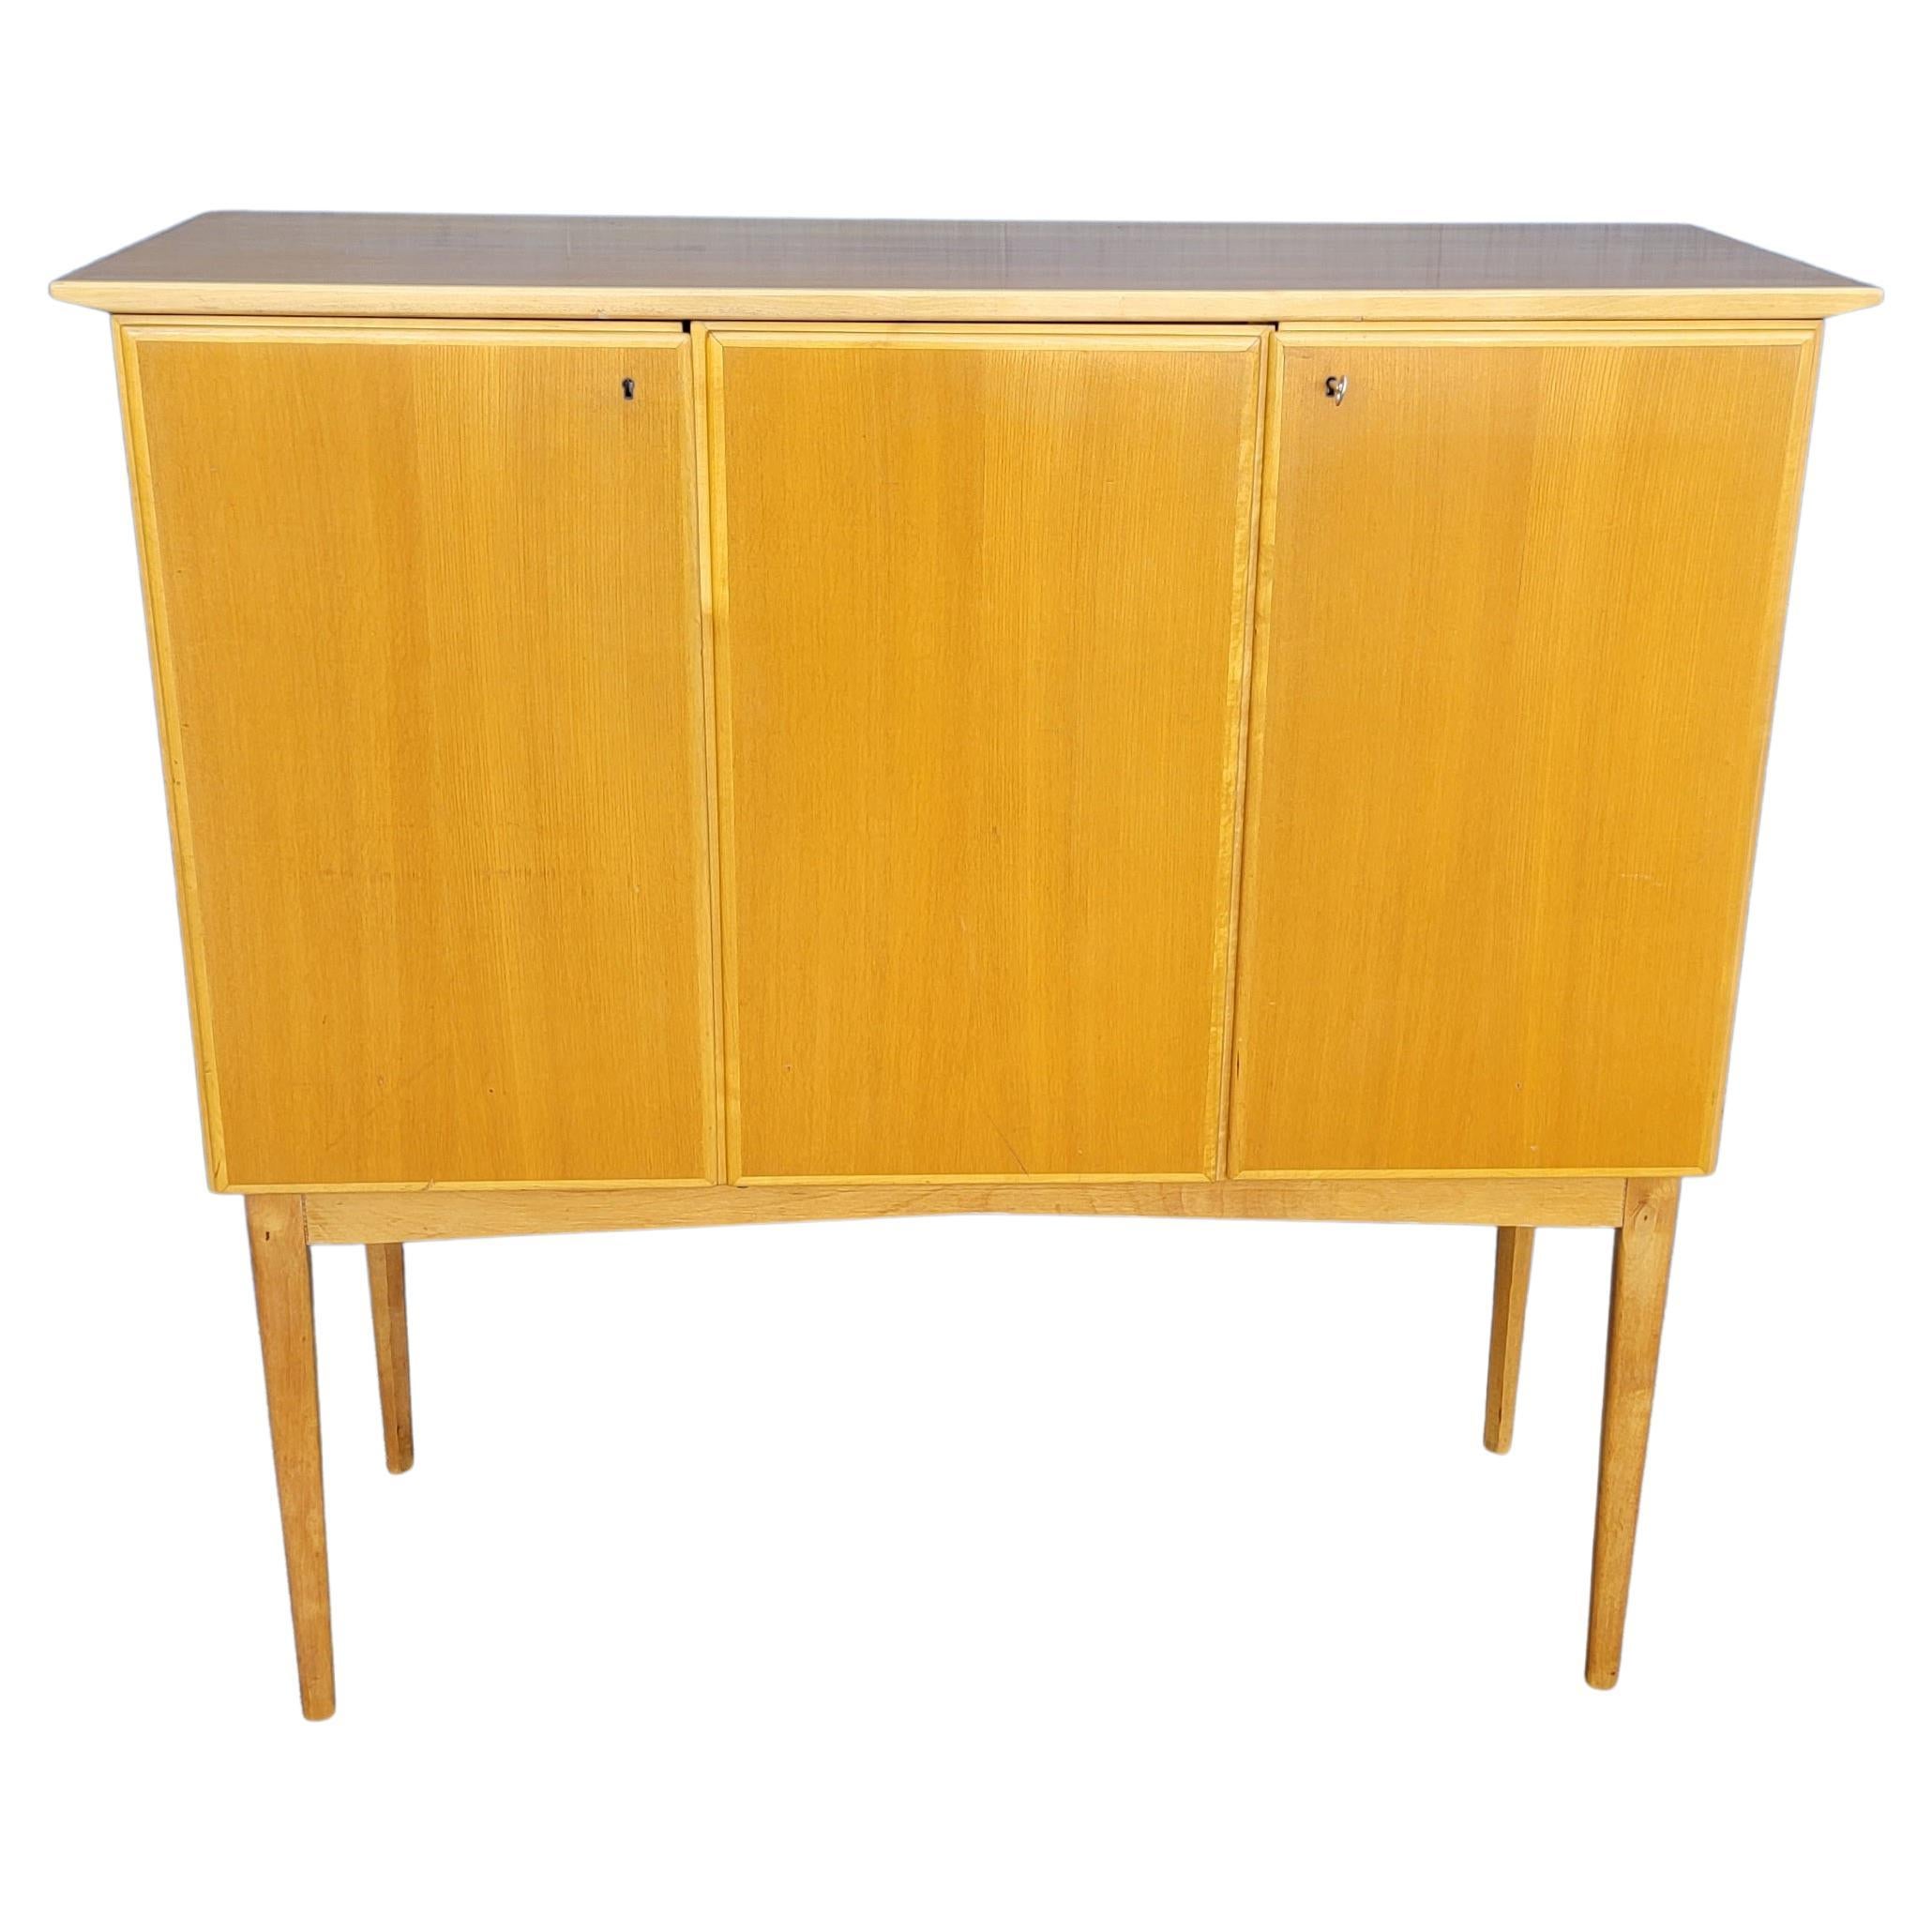 Nordiska Danish Modern Cabinet Attributed to Carl-Axel Acking  For Sale